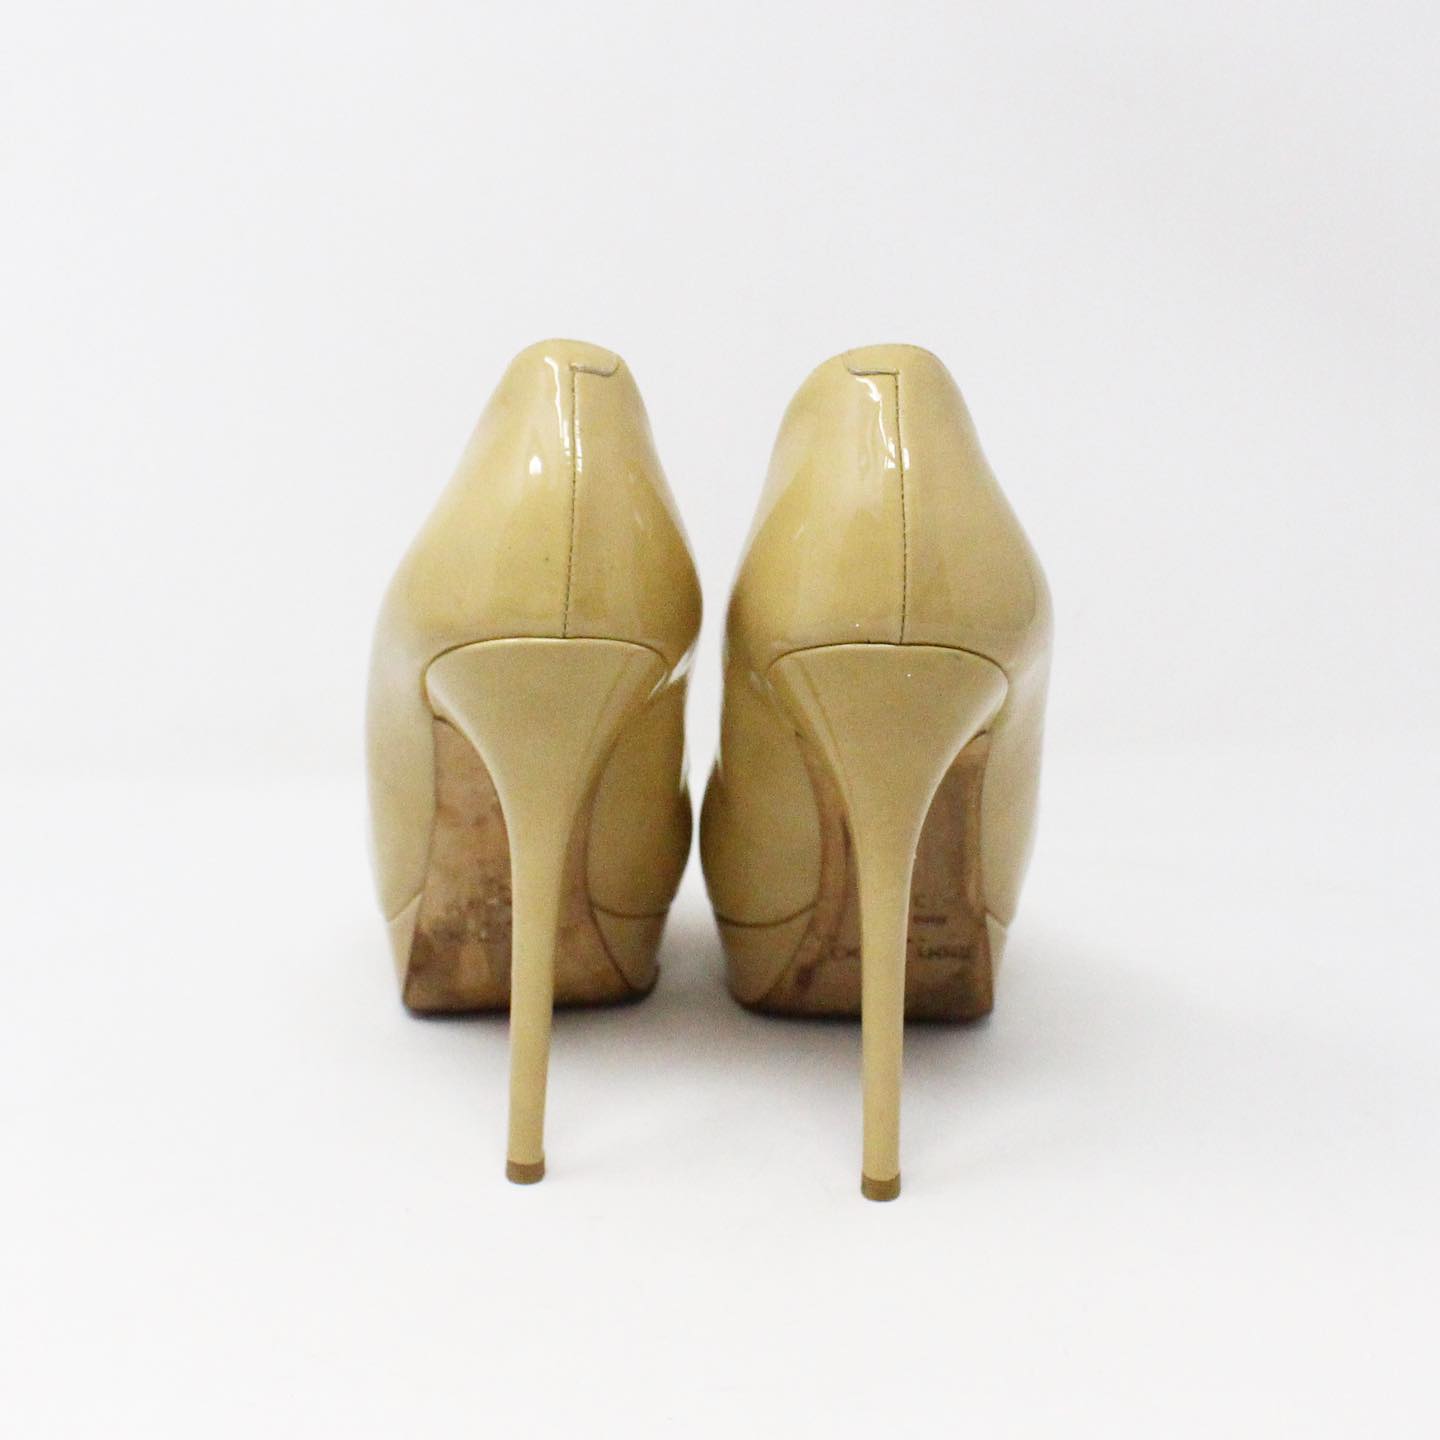 Patent leather heels Louis Vuitton Beige size 8.5 US in Patent